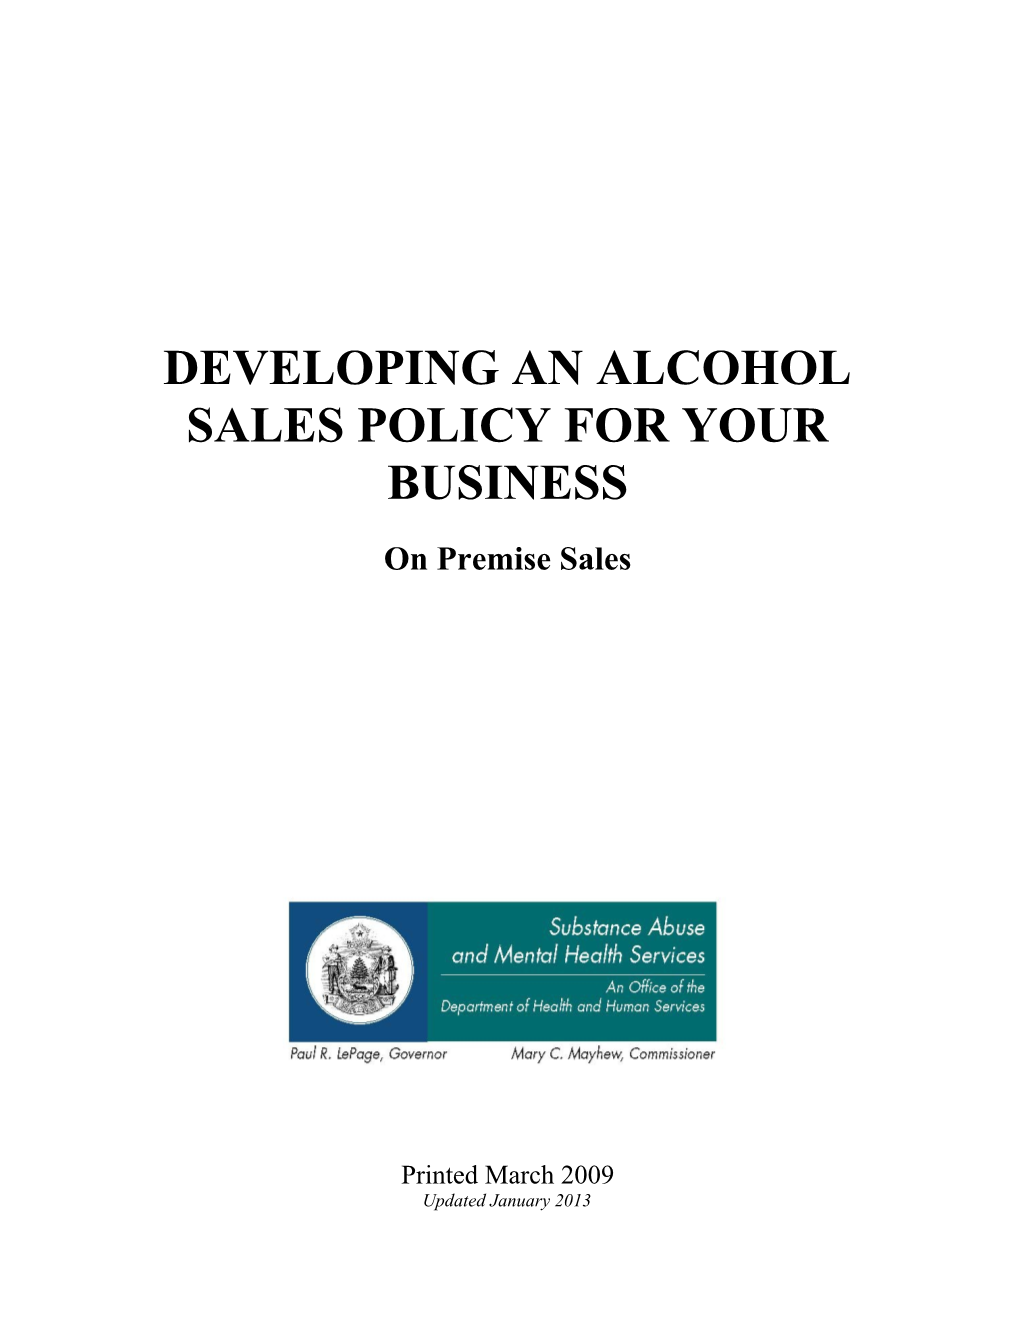 Developing an Alcohol Sales Policy for Your Business